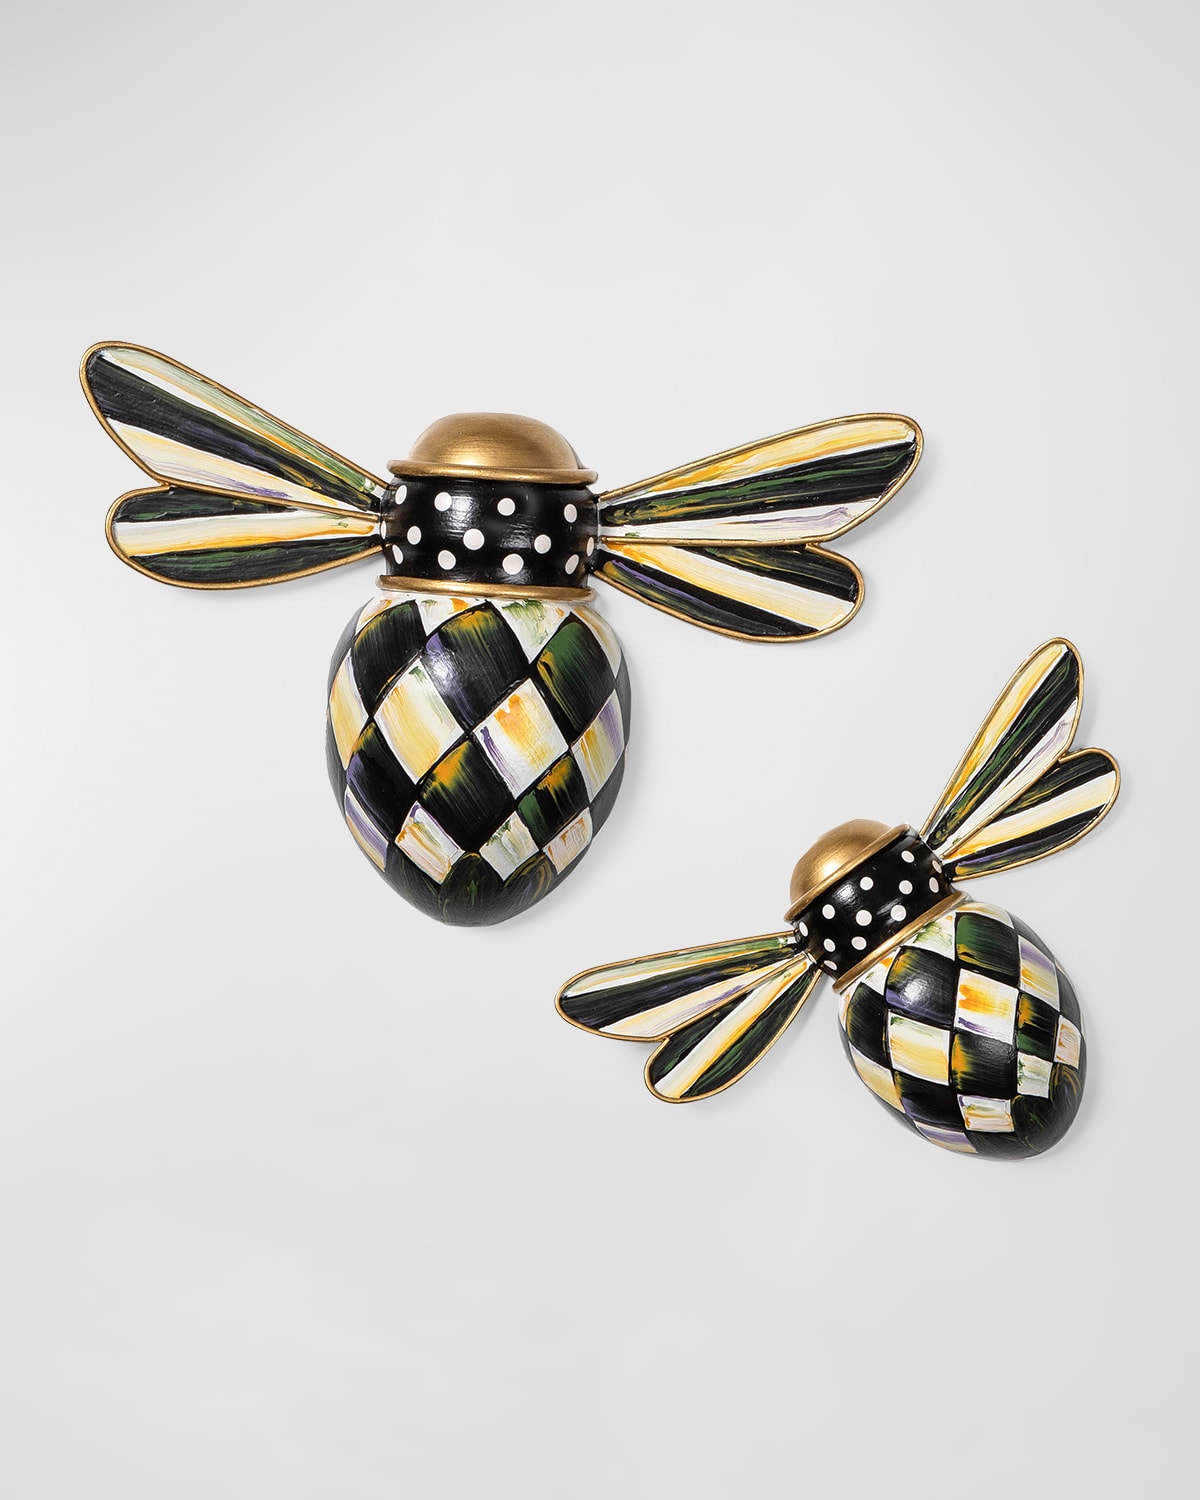 Mackenzie-childs Courtly Check Outdoor Bee Wall Decor, Set Of 2 In Black